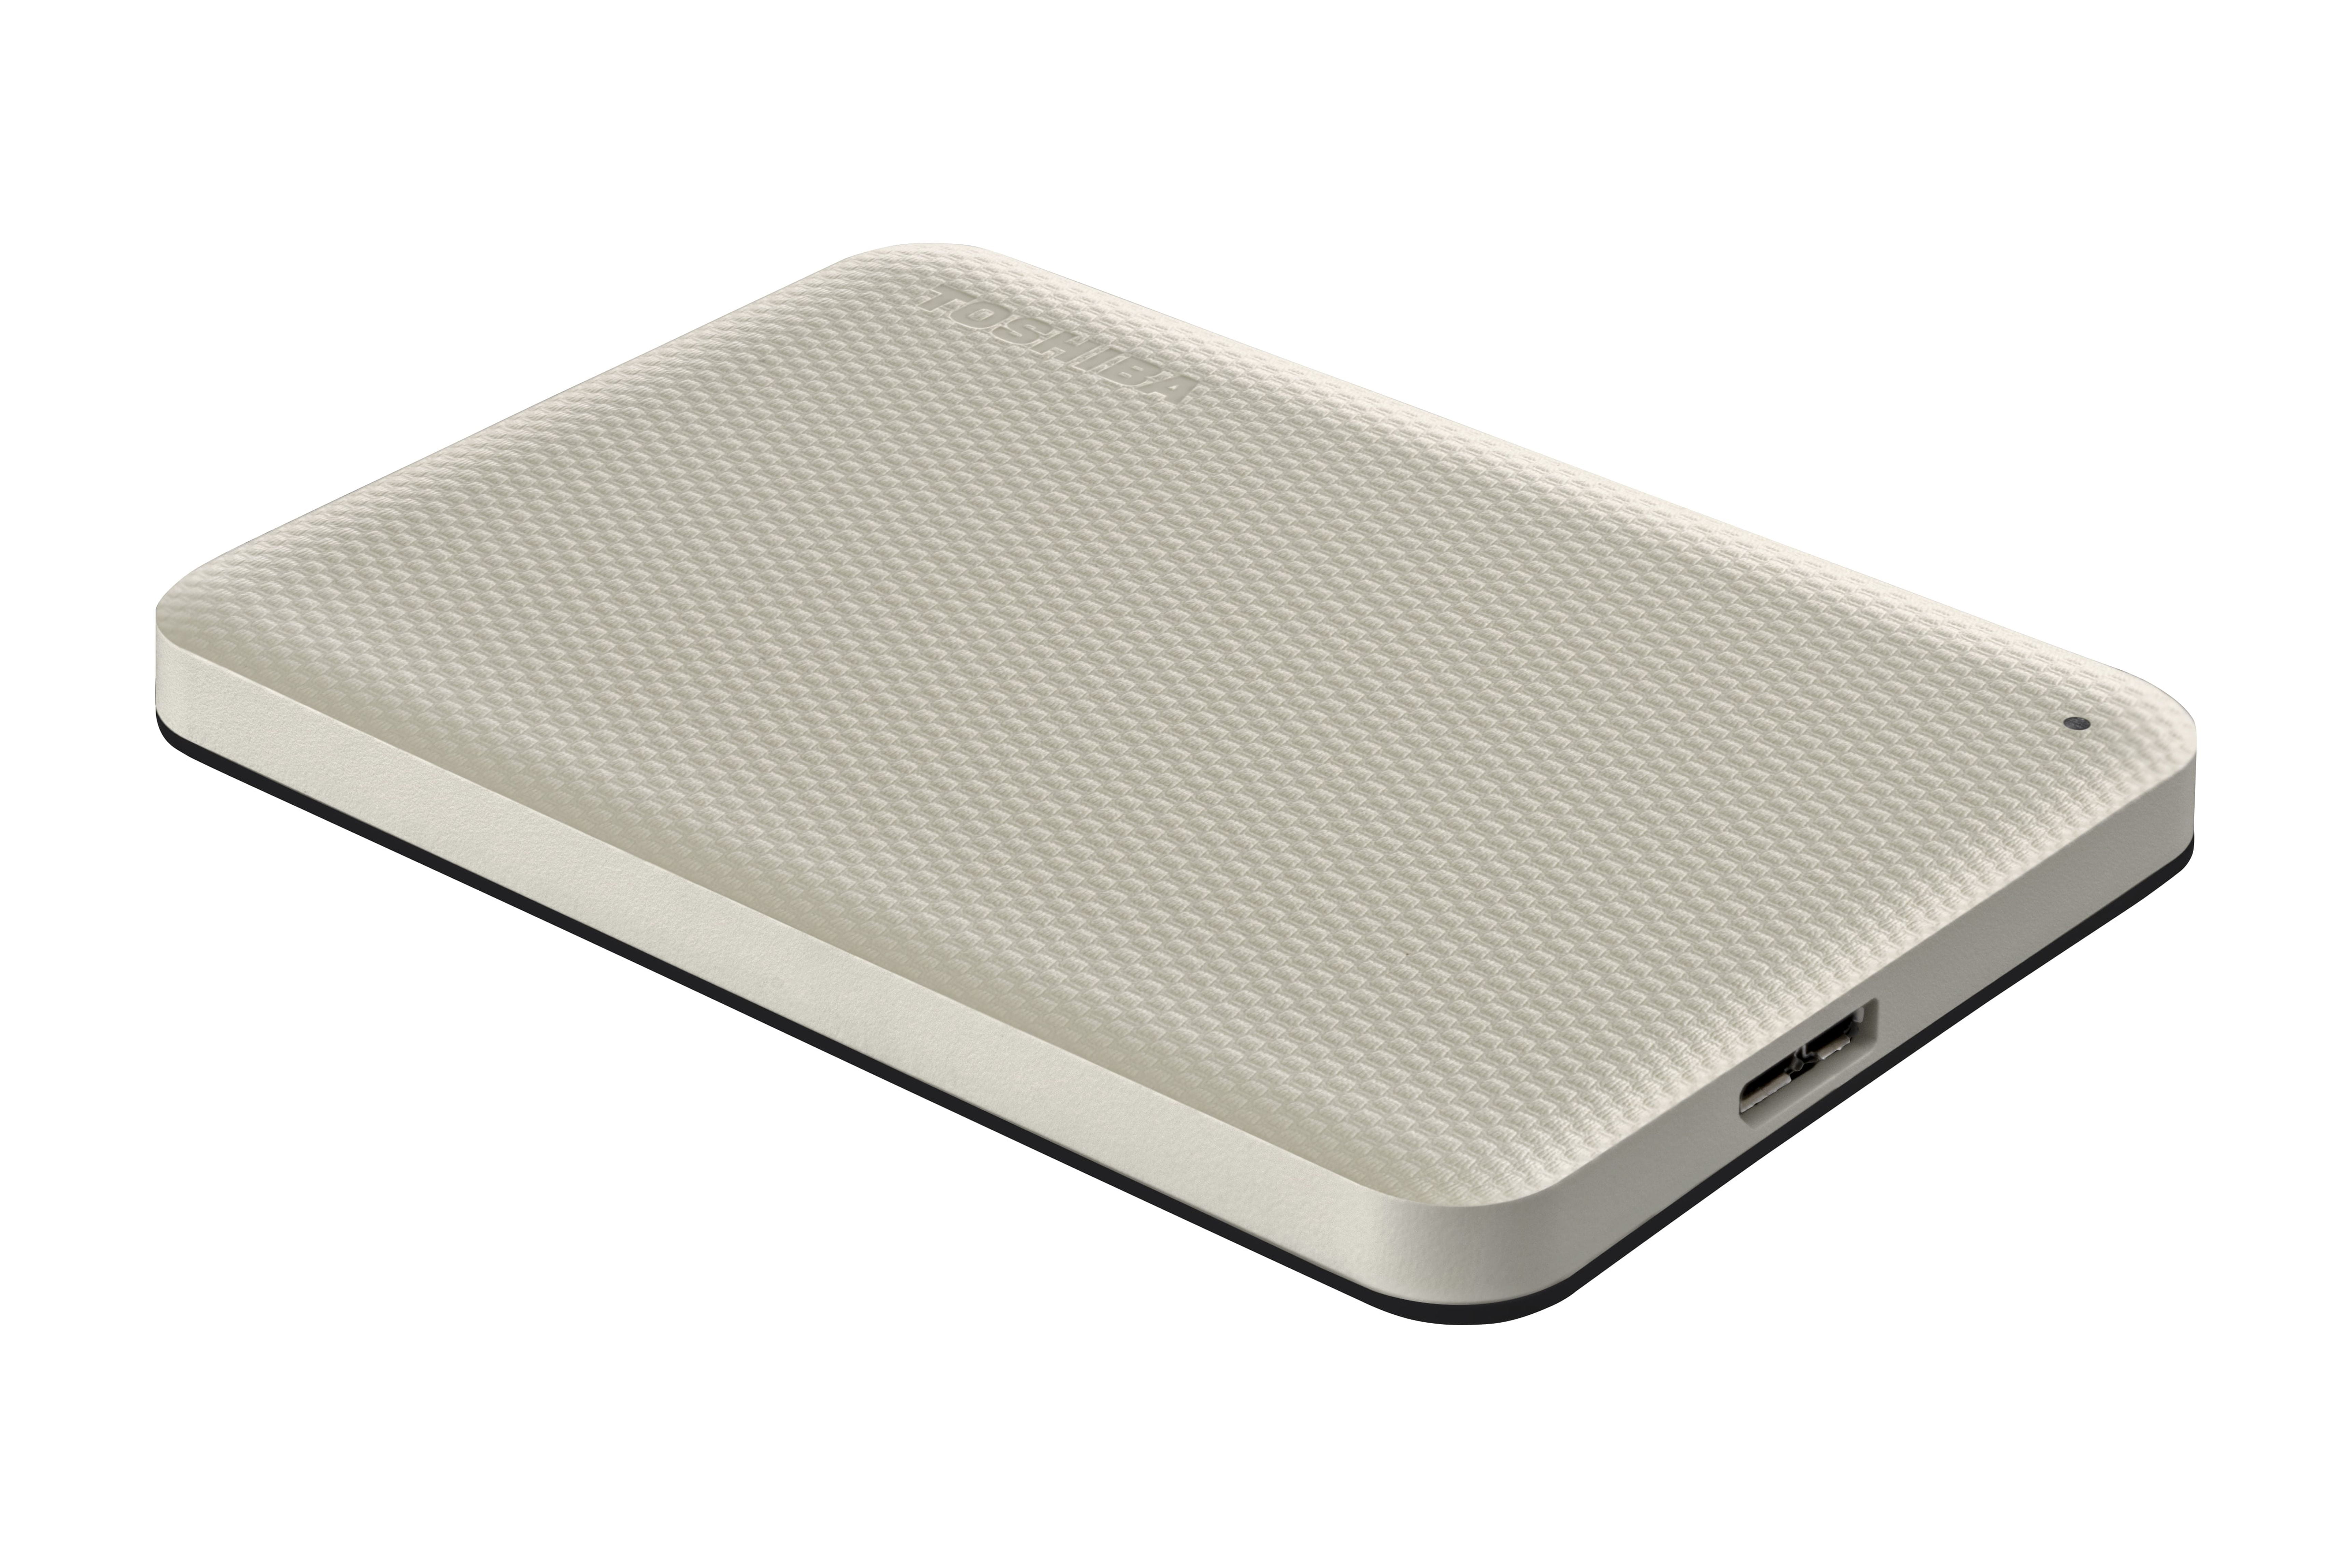 Toshiba CANVIO Advance Plus - Portable External Hard Drive 2TB USB 3.0 -  White (Includes both USB-A and USB-C Cables)